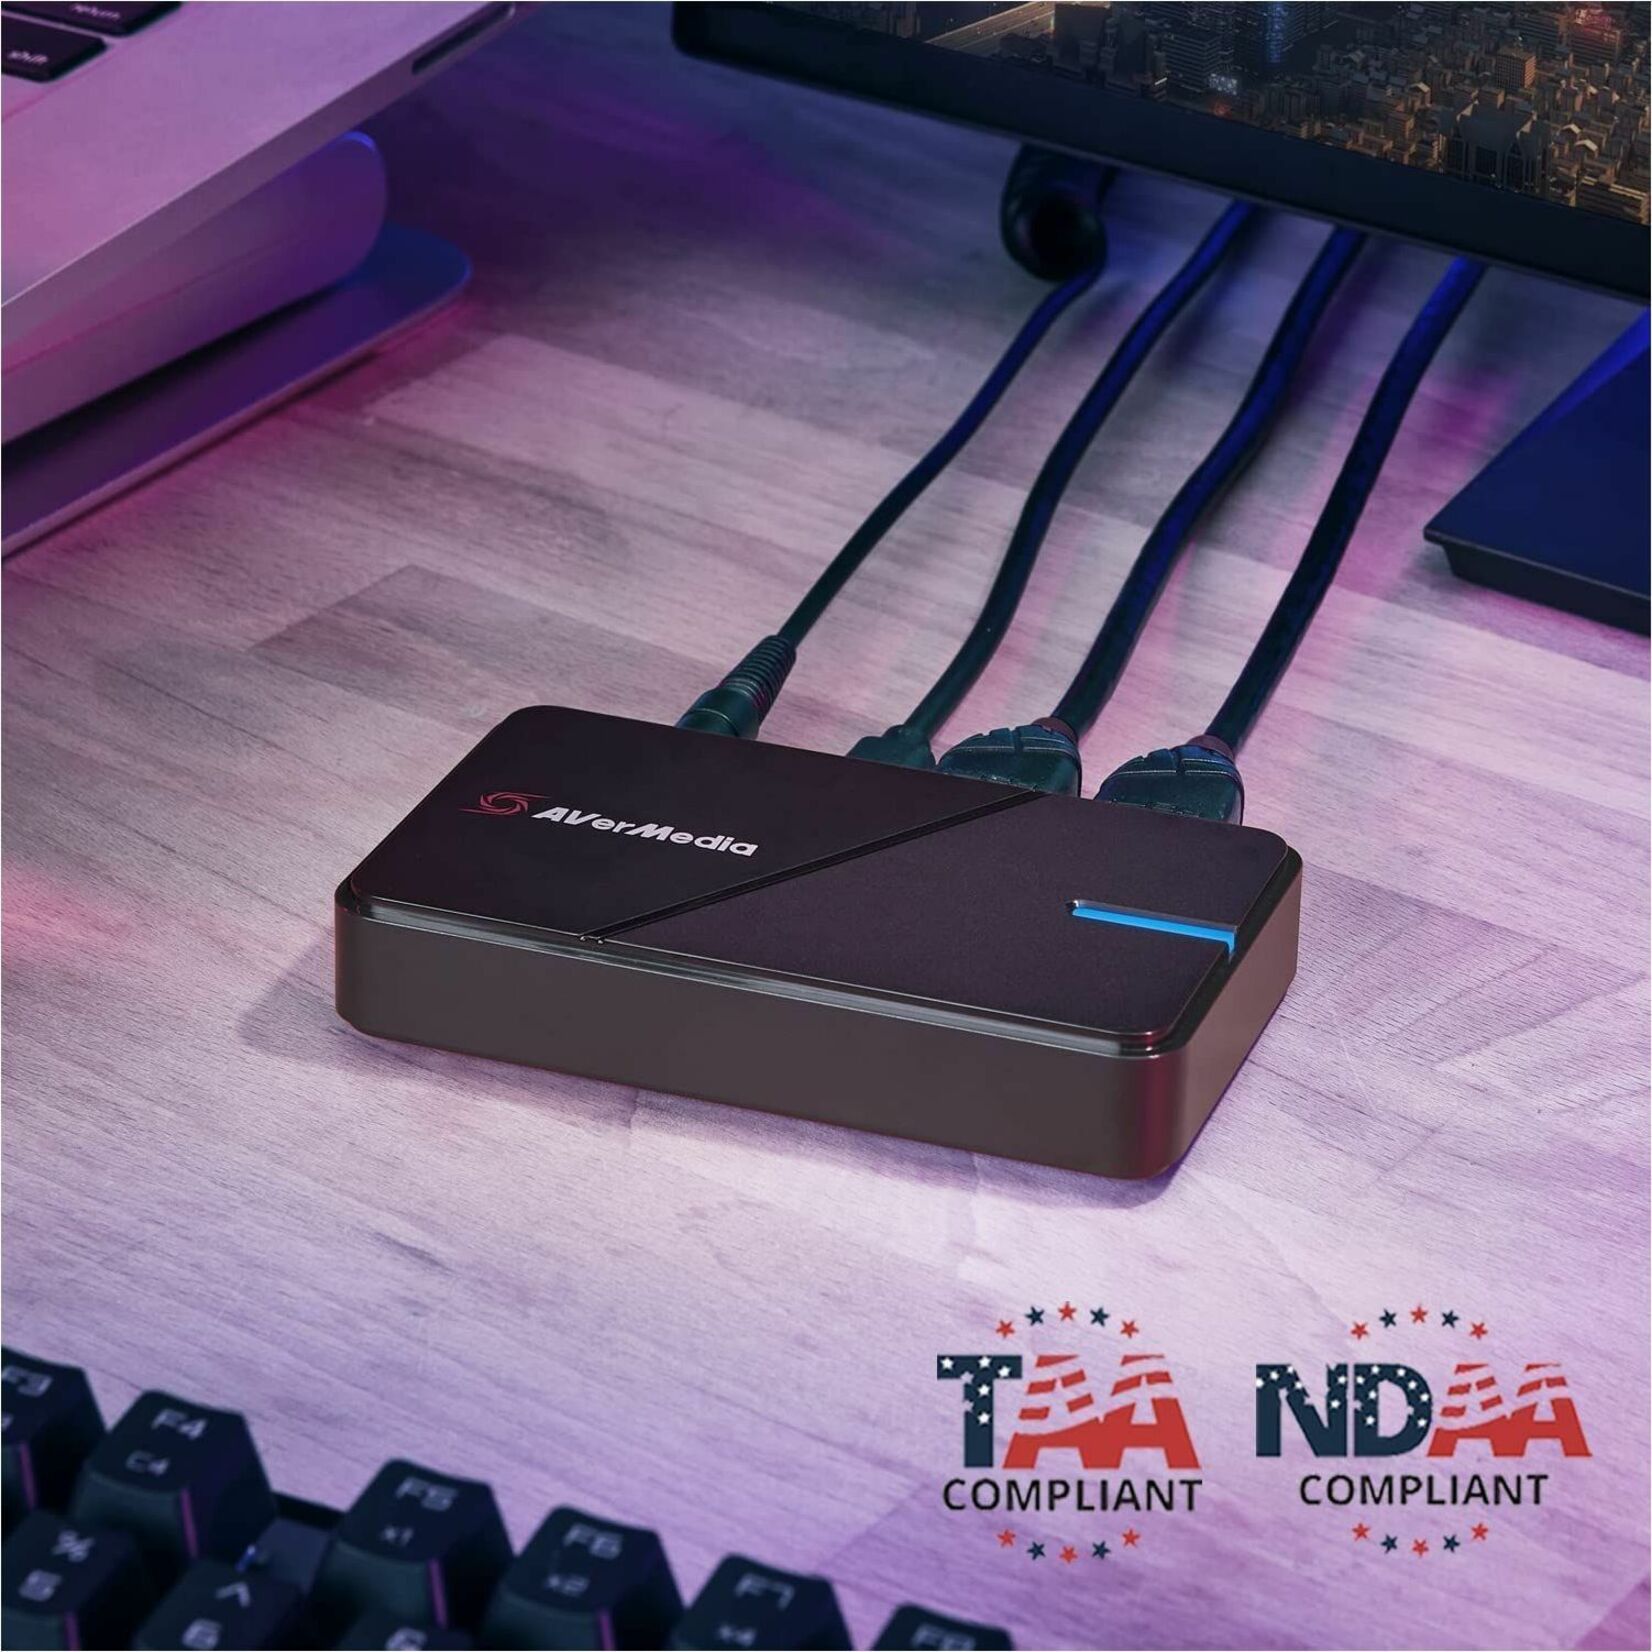 AVerMedia GC551G2 Live Gamer EXTREME 3 Plug and Play 4K Capture Card, TAA and NDAA Compliant